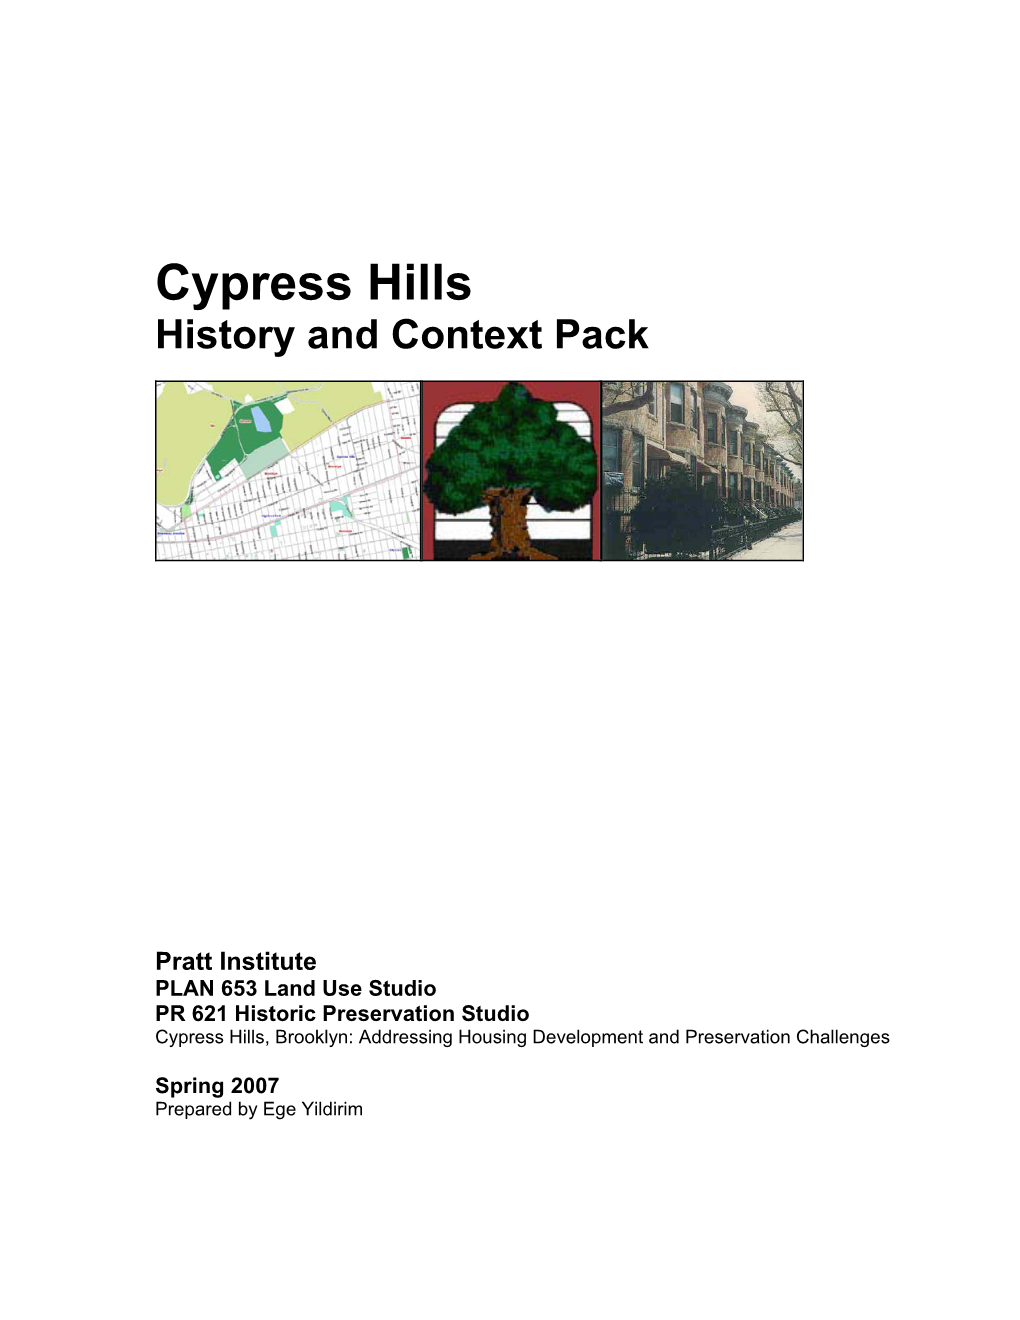 Cypress Hills History and Context Pack